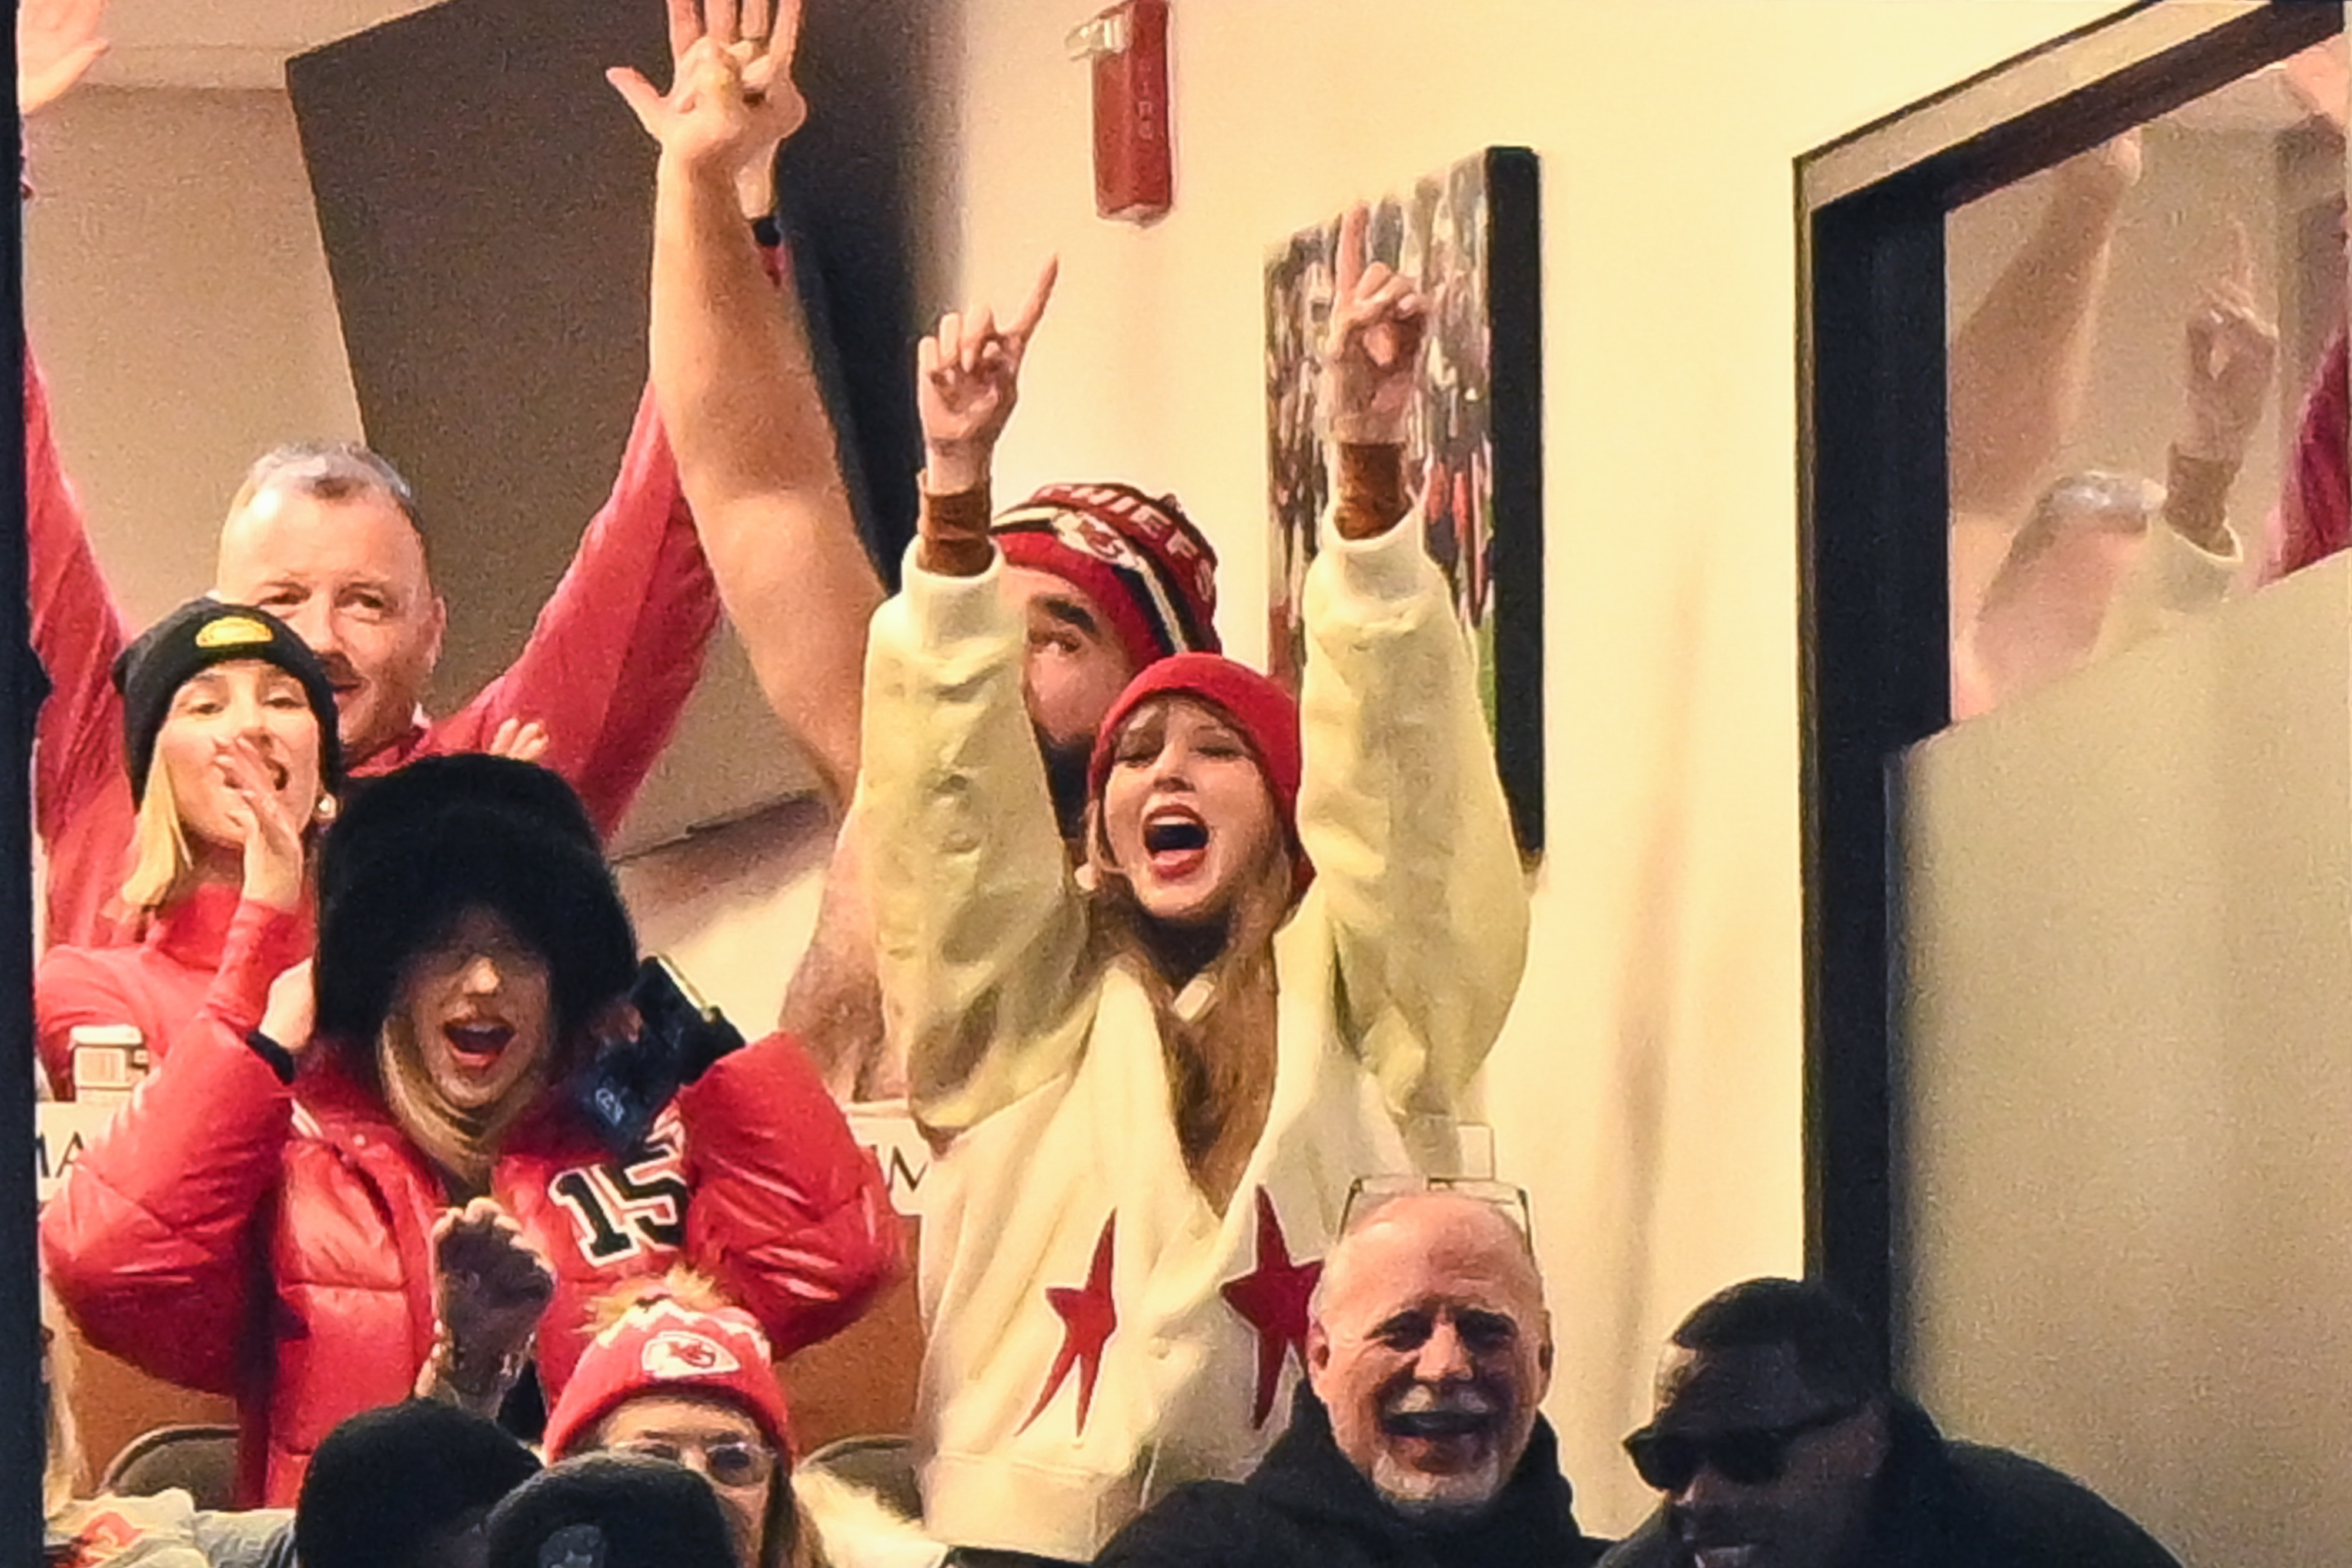 taylor swift cheering in the suite